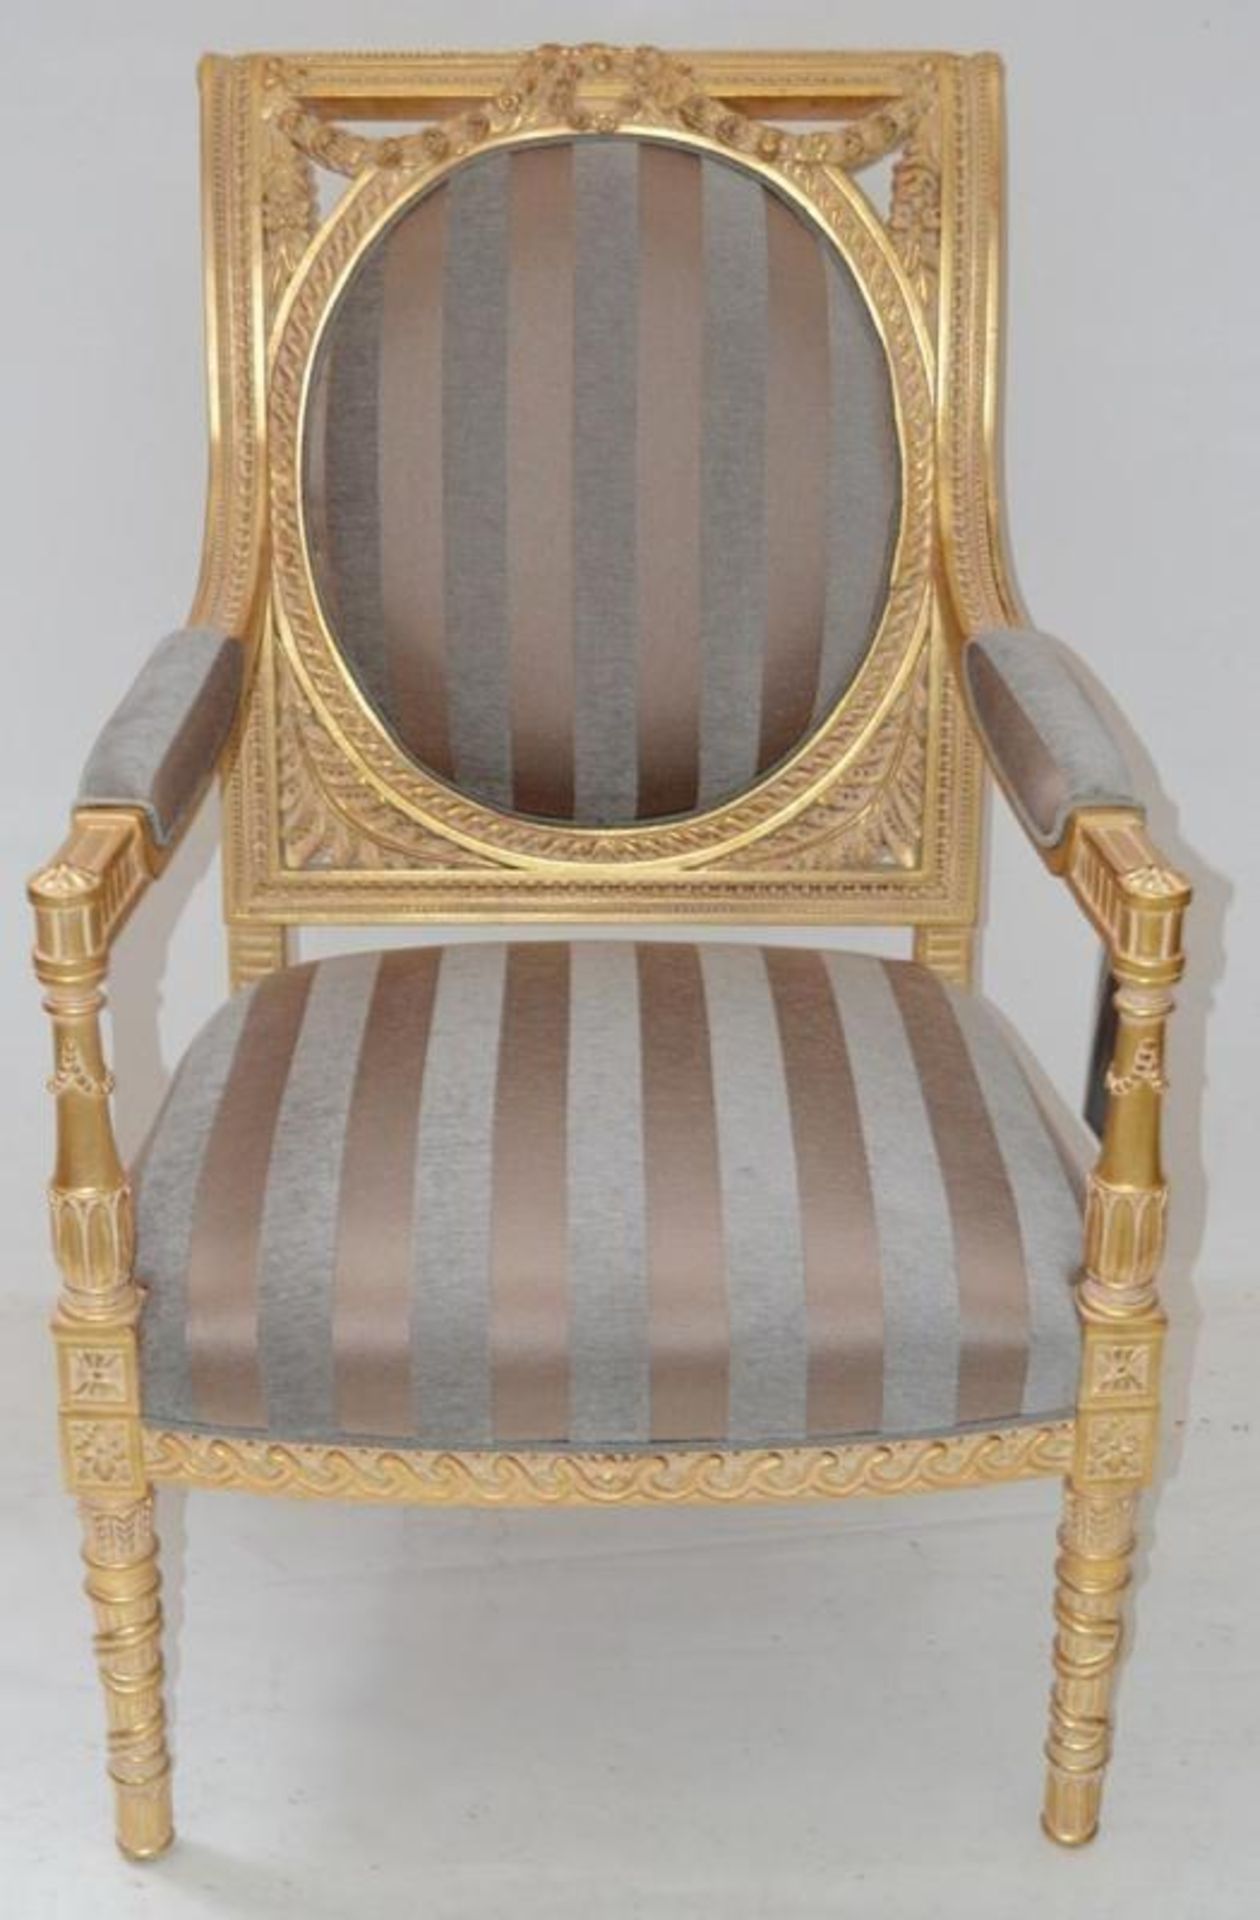 1 x DURESTA Flavia Chair - Features A Hand-Carved Hard Wood Frame With Hand-Stitched Coil Sprung Sea - Image 9 of 16